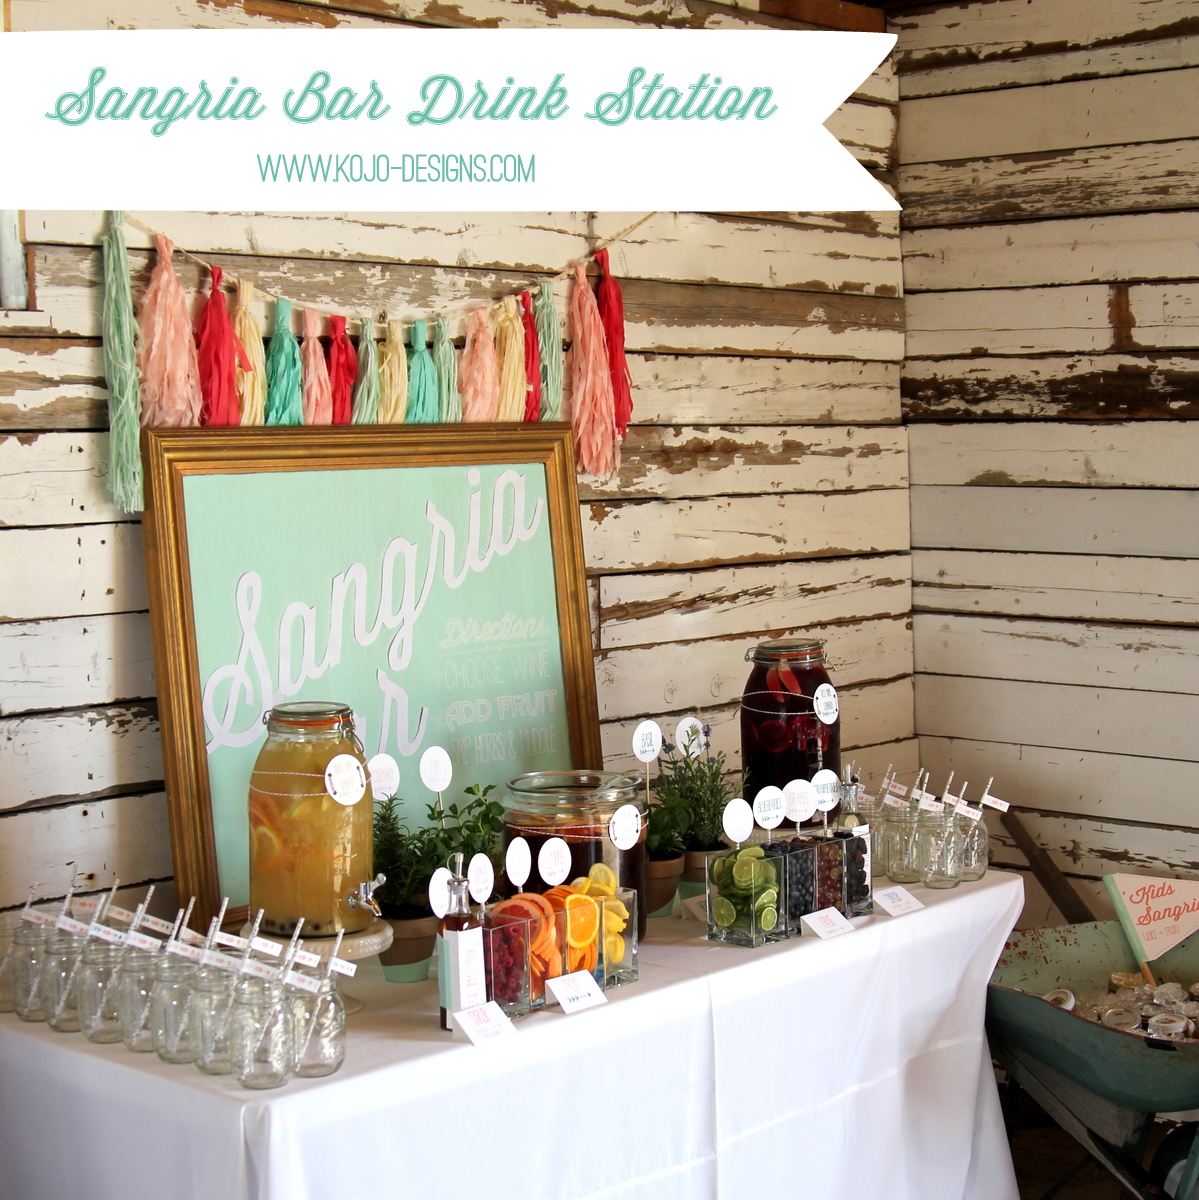 sangria bar drink station- add wine, fruit, herbs, and you have a seriously fabulous party station